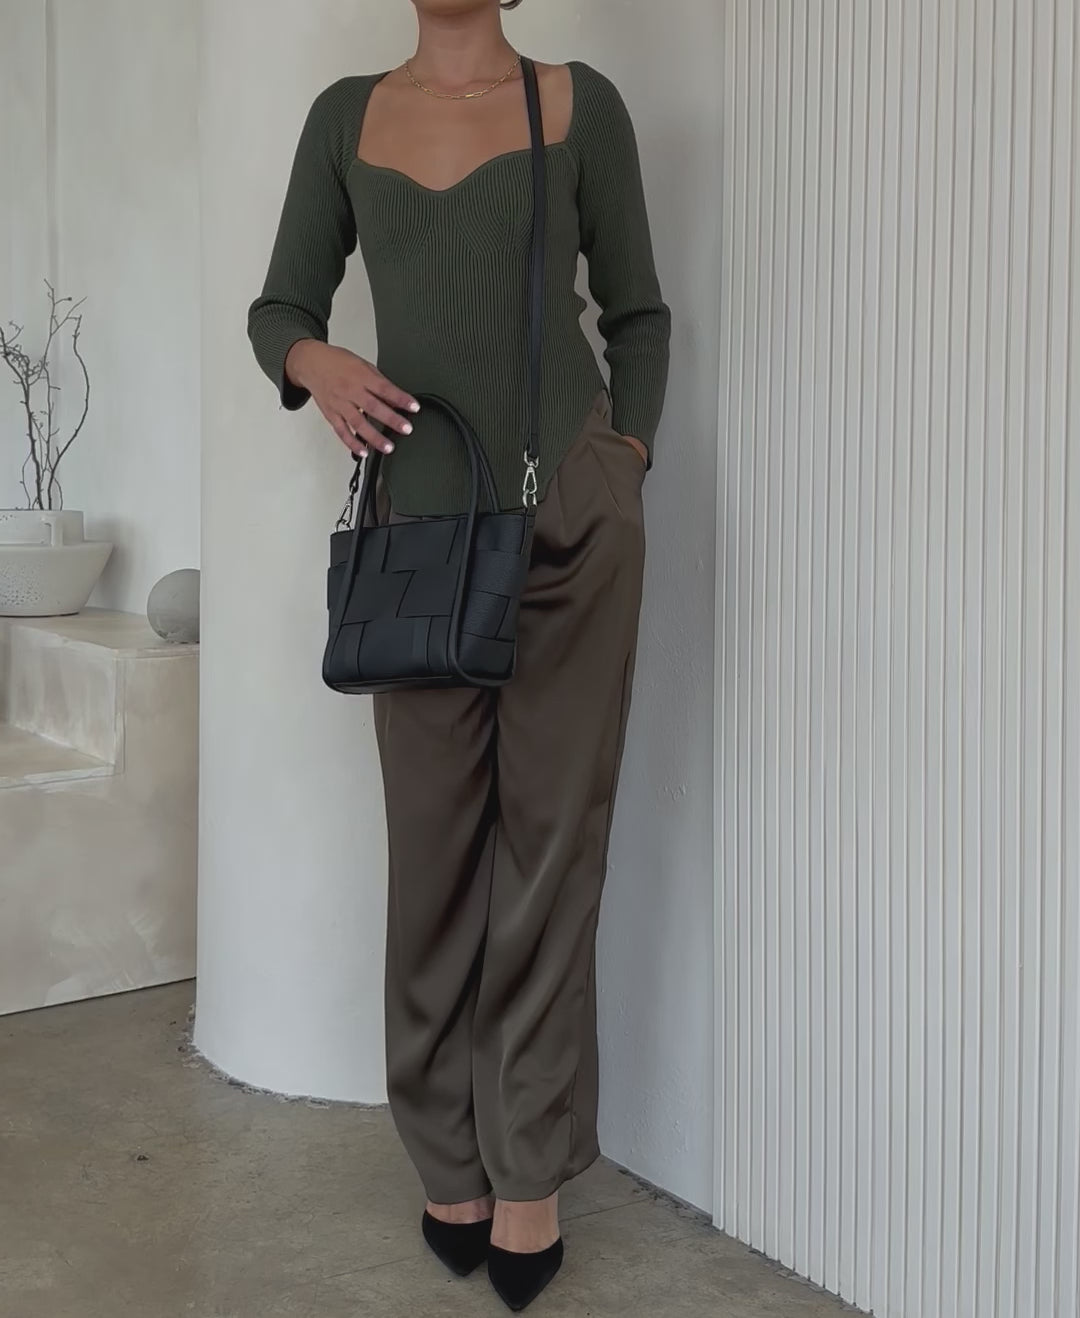 Video of a model wearing a black woven wide strap vegan leather tote bag against a white wall. 